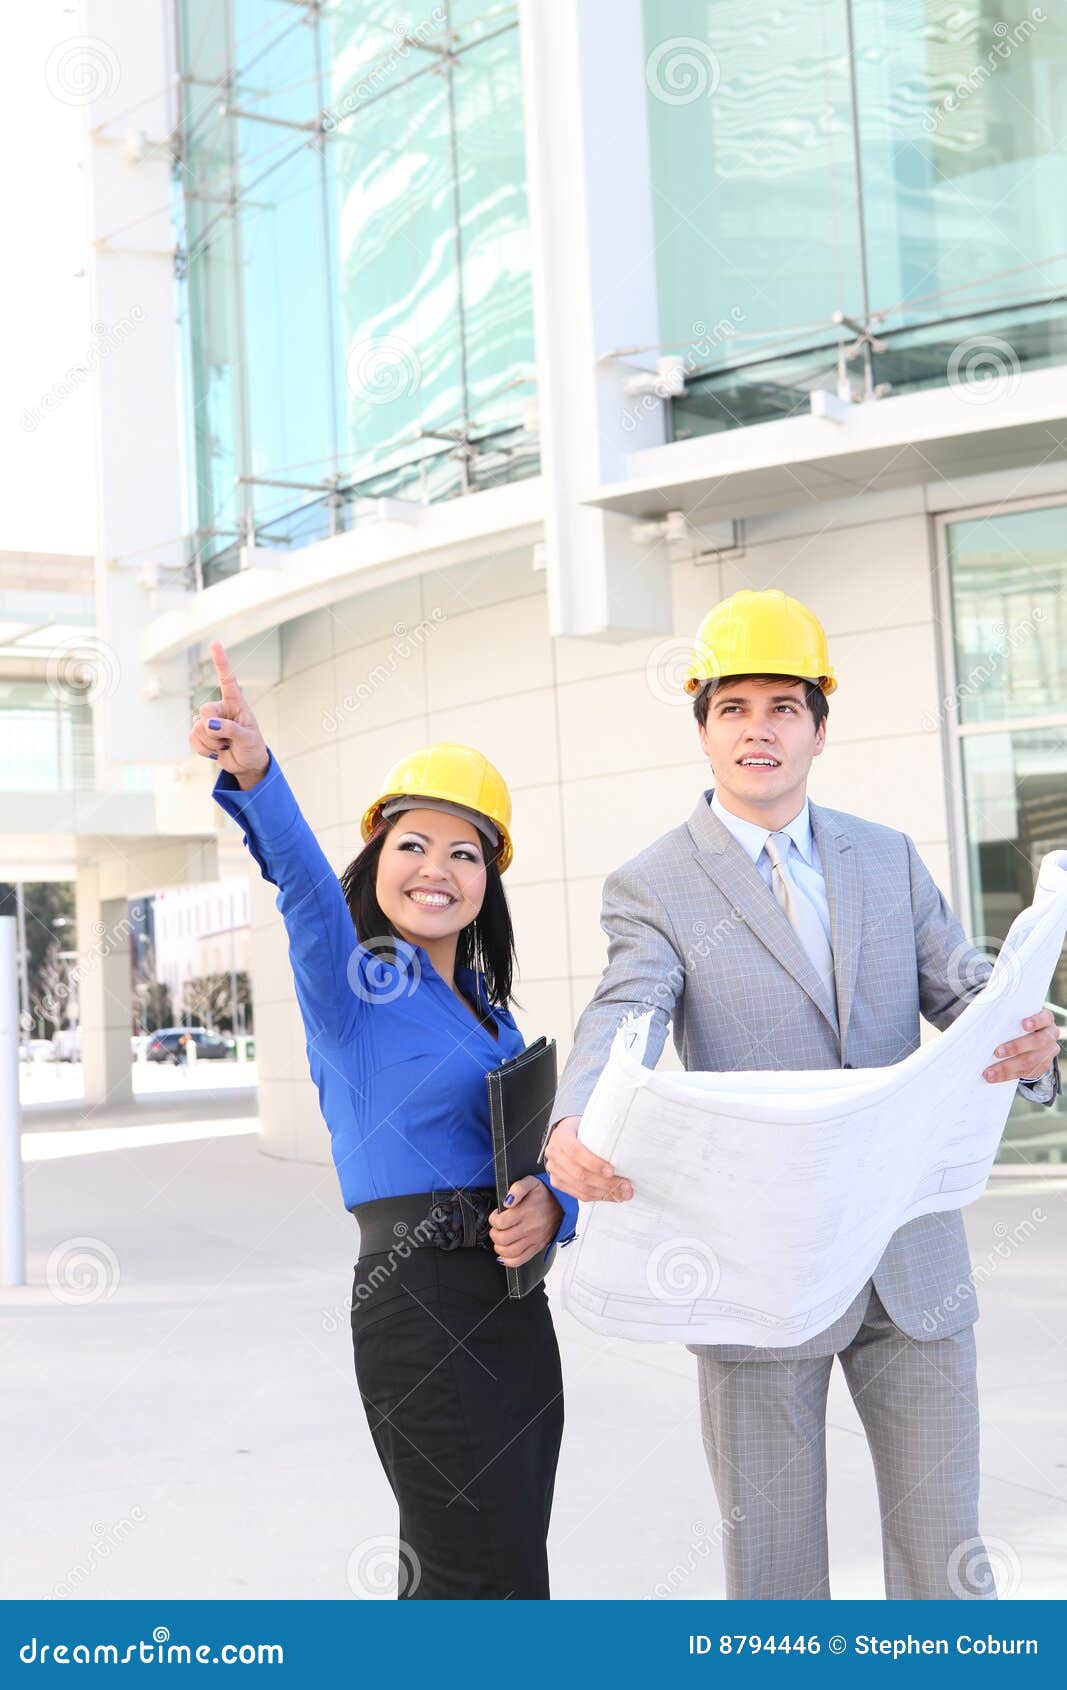 Architects On Building Construction Site Stock Photo ...